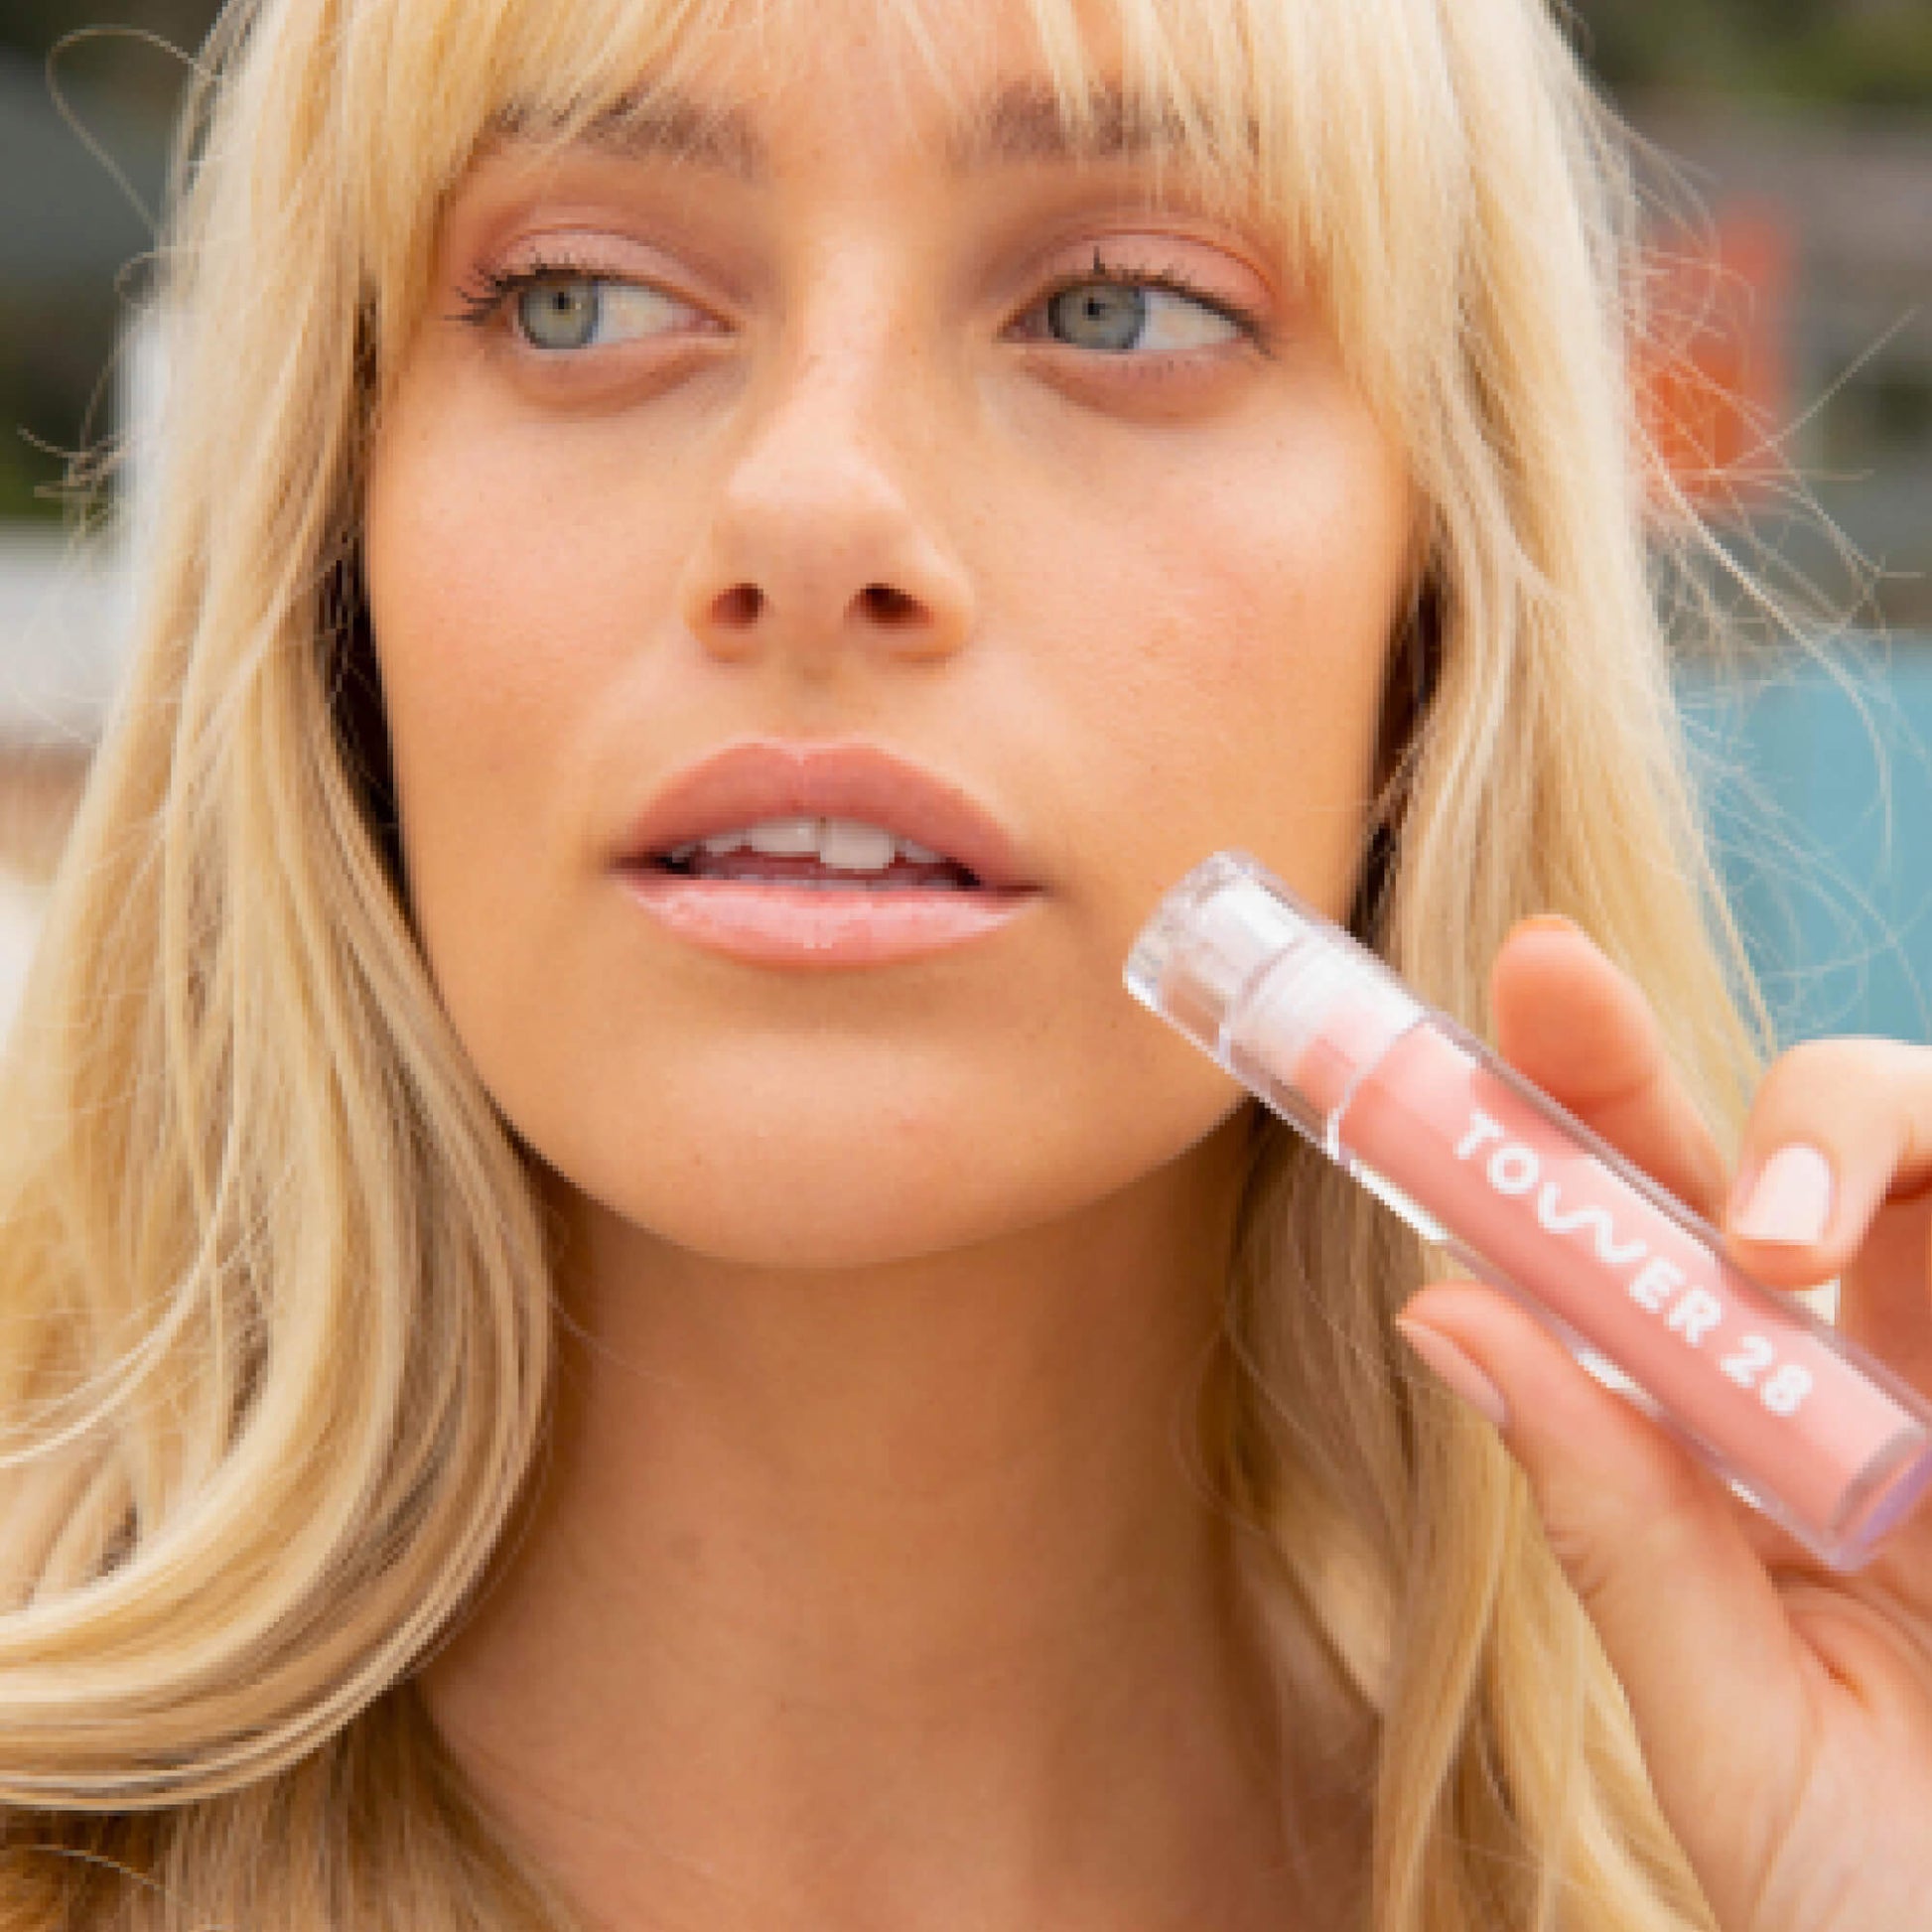 A model wearing the Tower 28 Beauty ShineOn Lip Jelly in the shade Oat on her lips